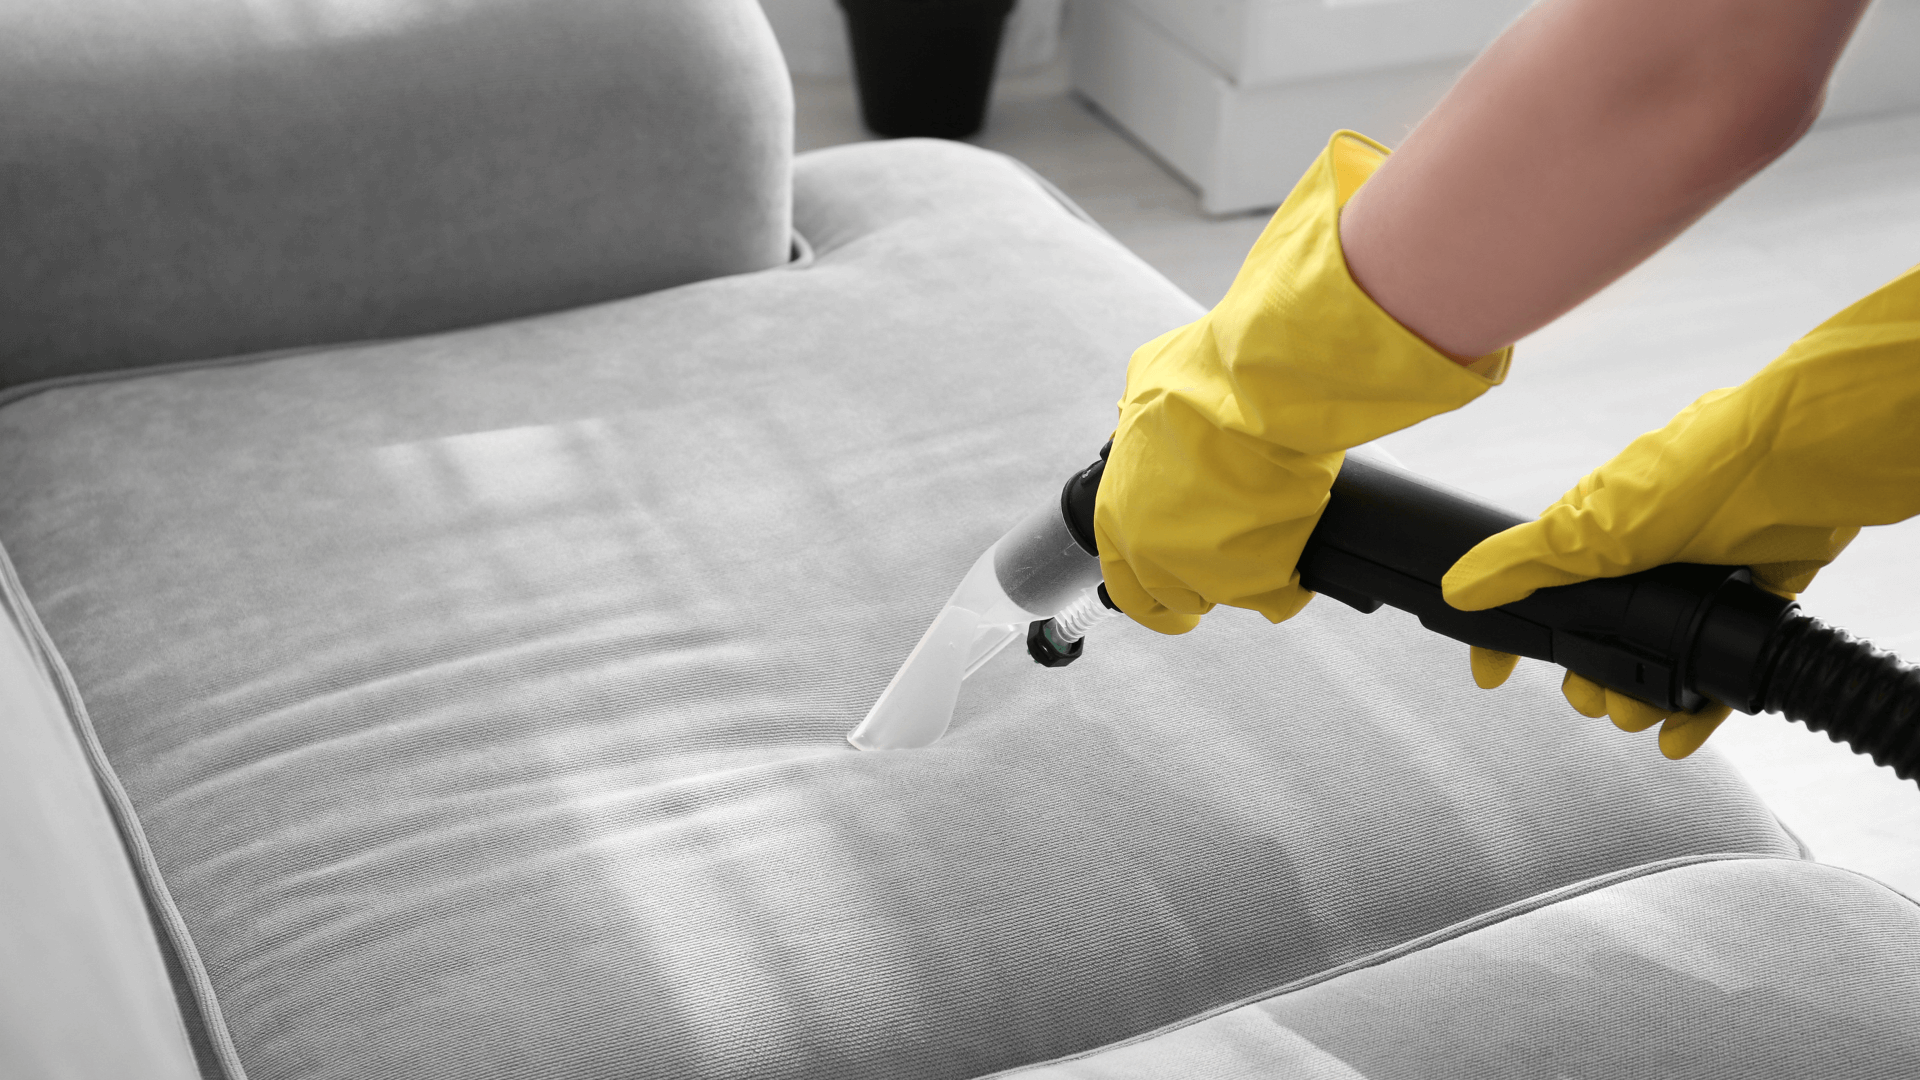 Remove dust, gentry scrub upholsteries with the right upholstery cleaner.